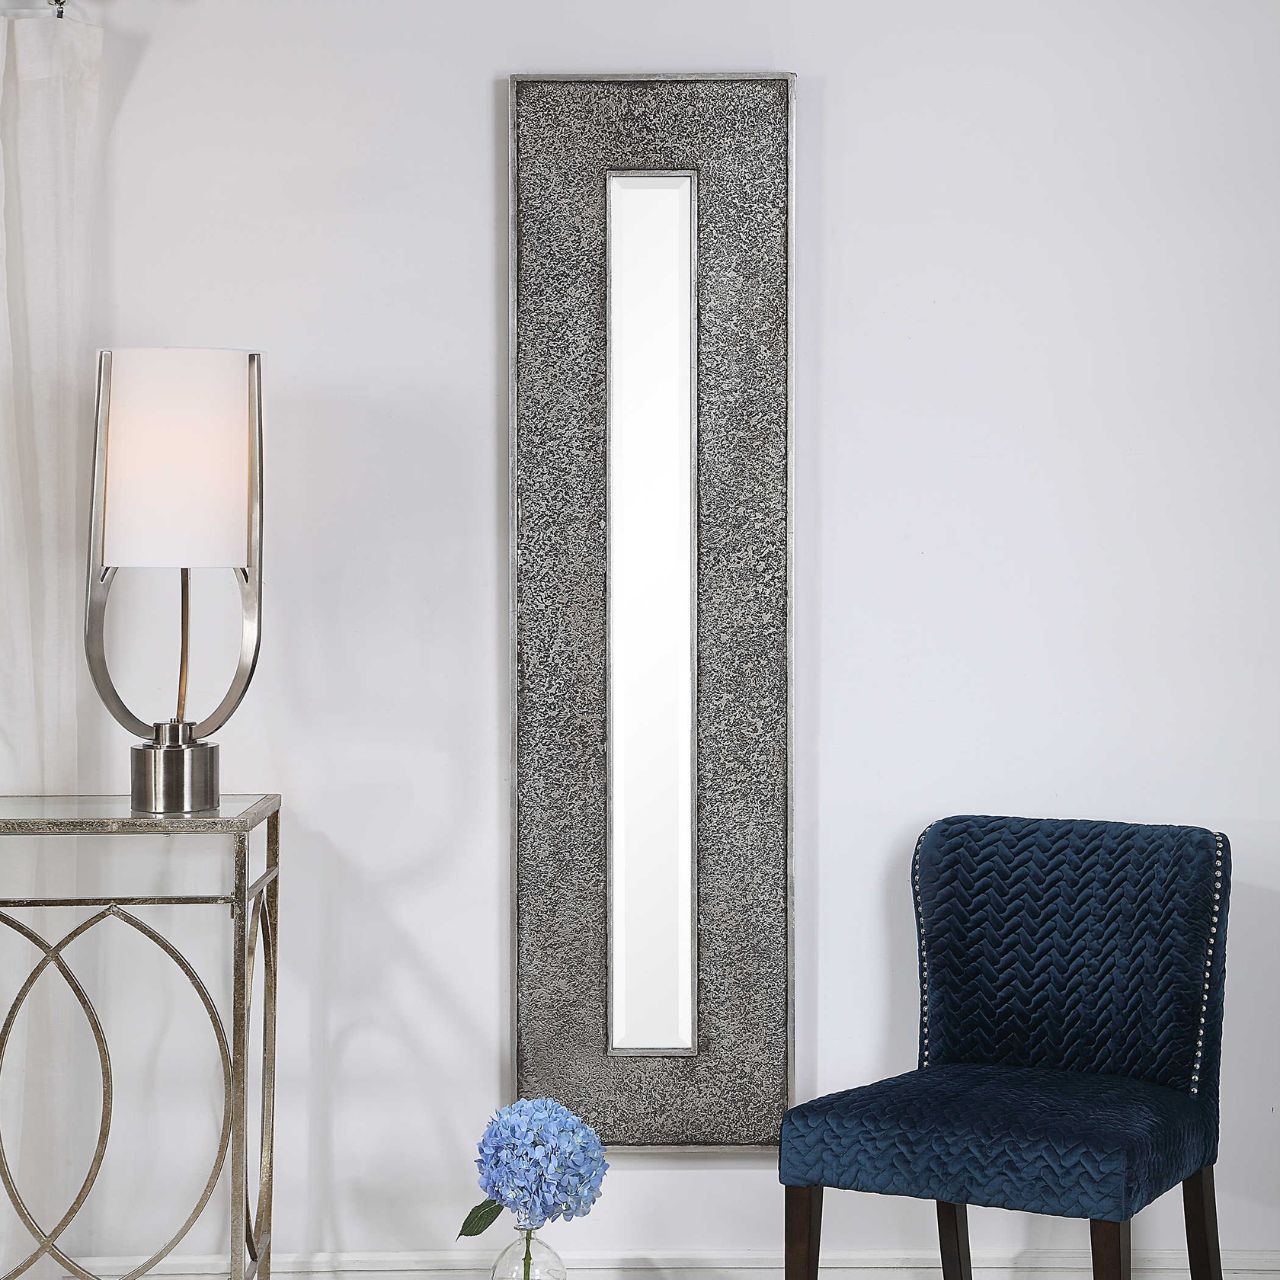 Bannon Mirror by Mindy Brownes - NEW  This rectangular mirror features a heavily textured surface finished in a metallic silver leaf with a heavy charcoal wash over a solid wood construction. This contemporary design boasts a great profile for showing individually or multiple for a bold statement. The mirror is bevelled and can hang vertically and horizontally.